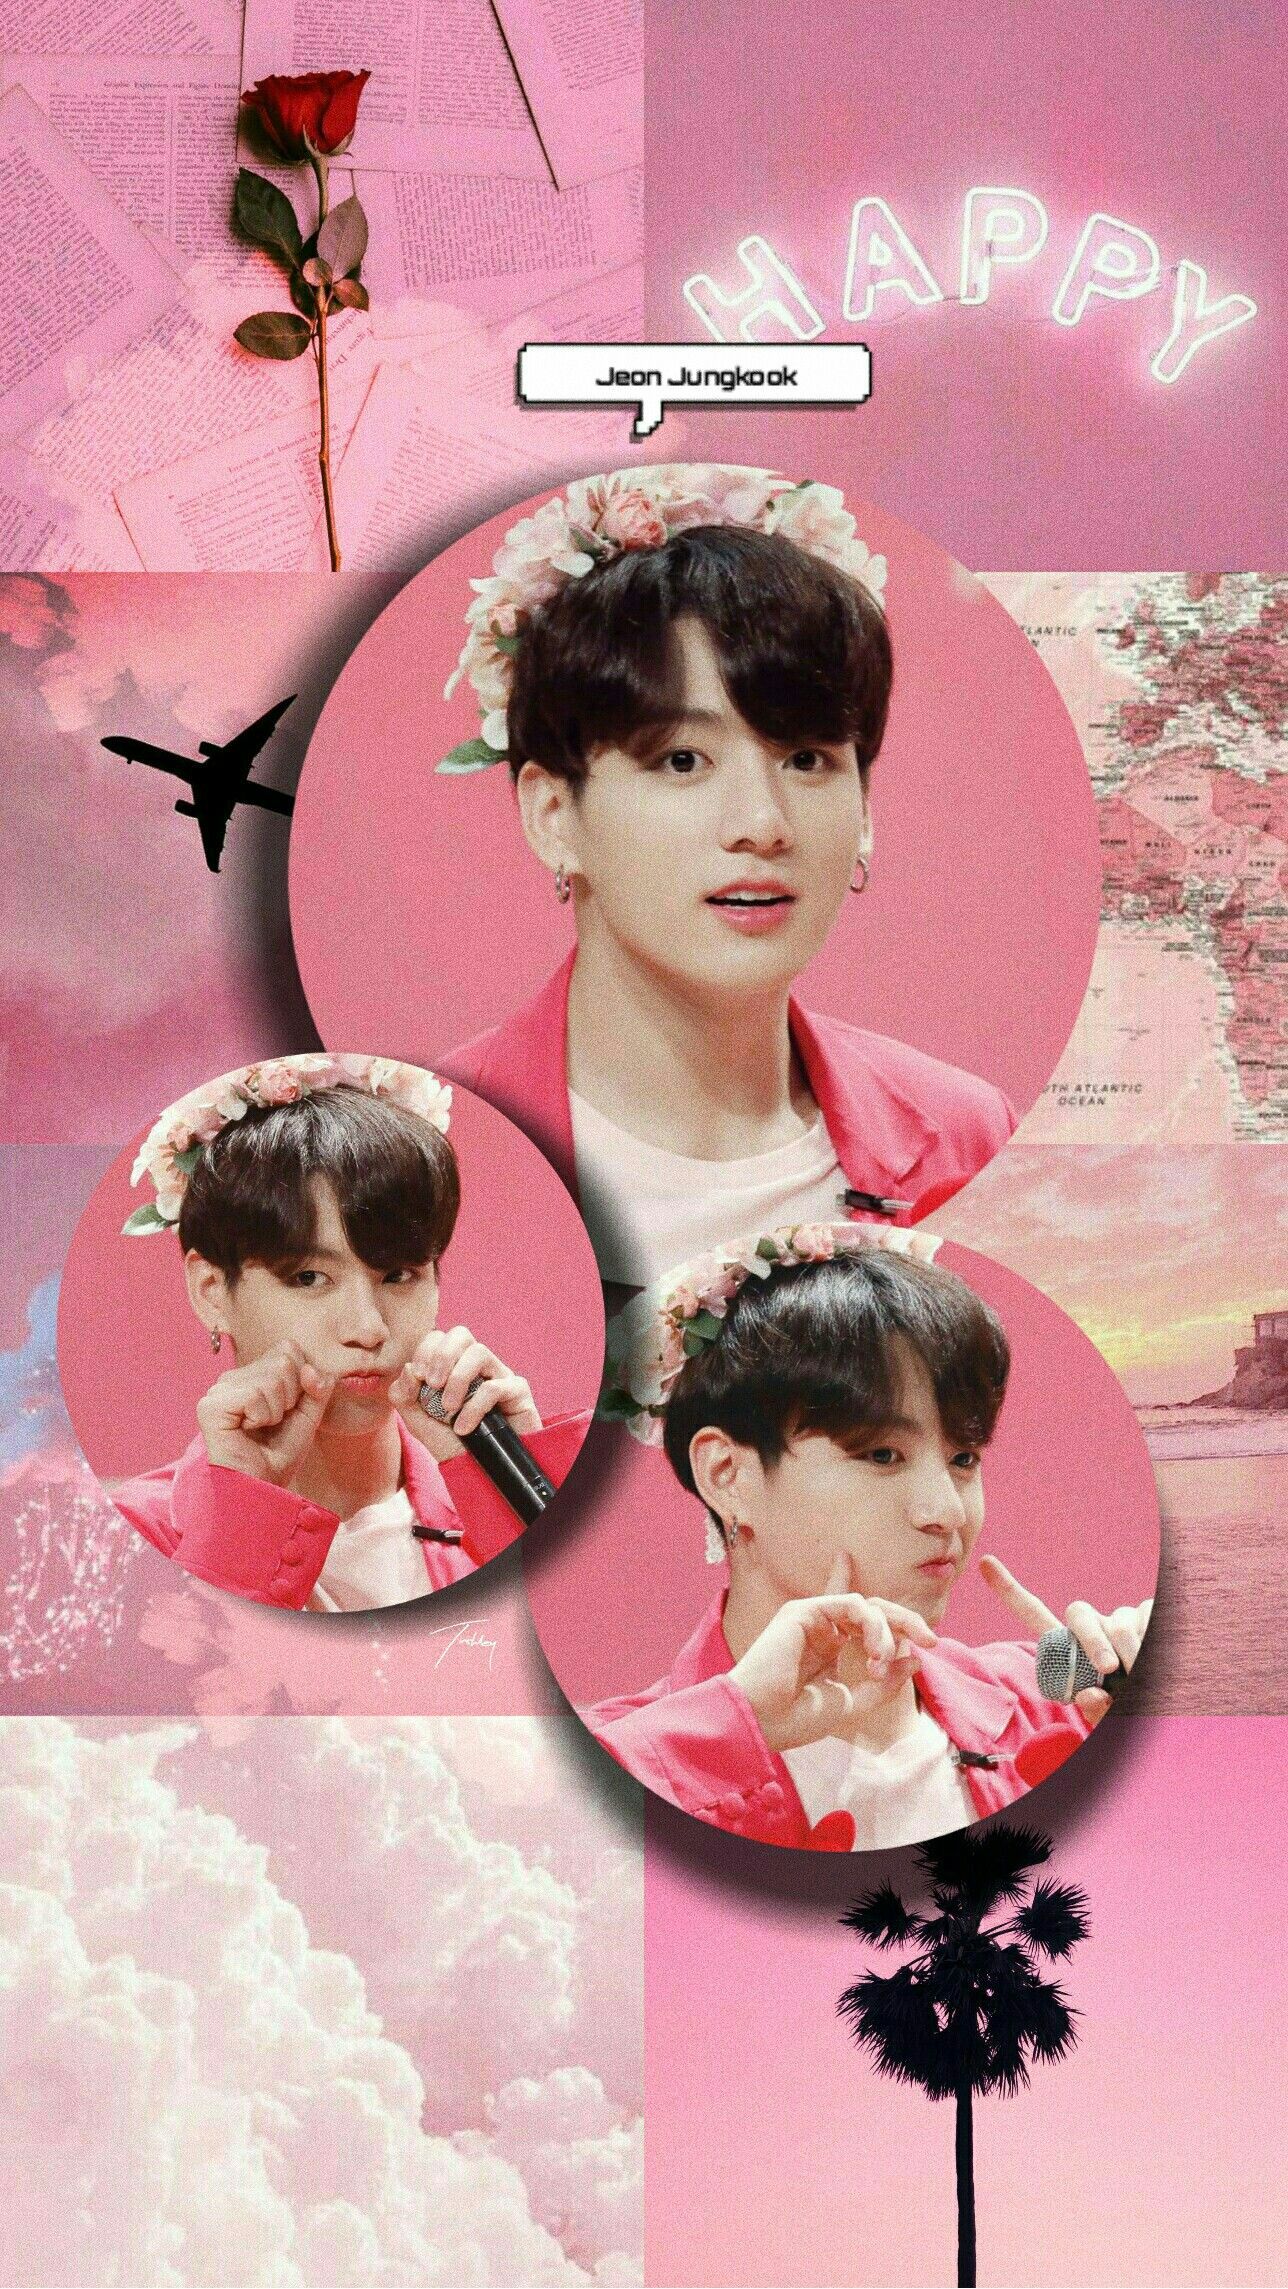 BTS wallpaper made by me! I hope you like it! - Jungkook